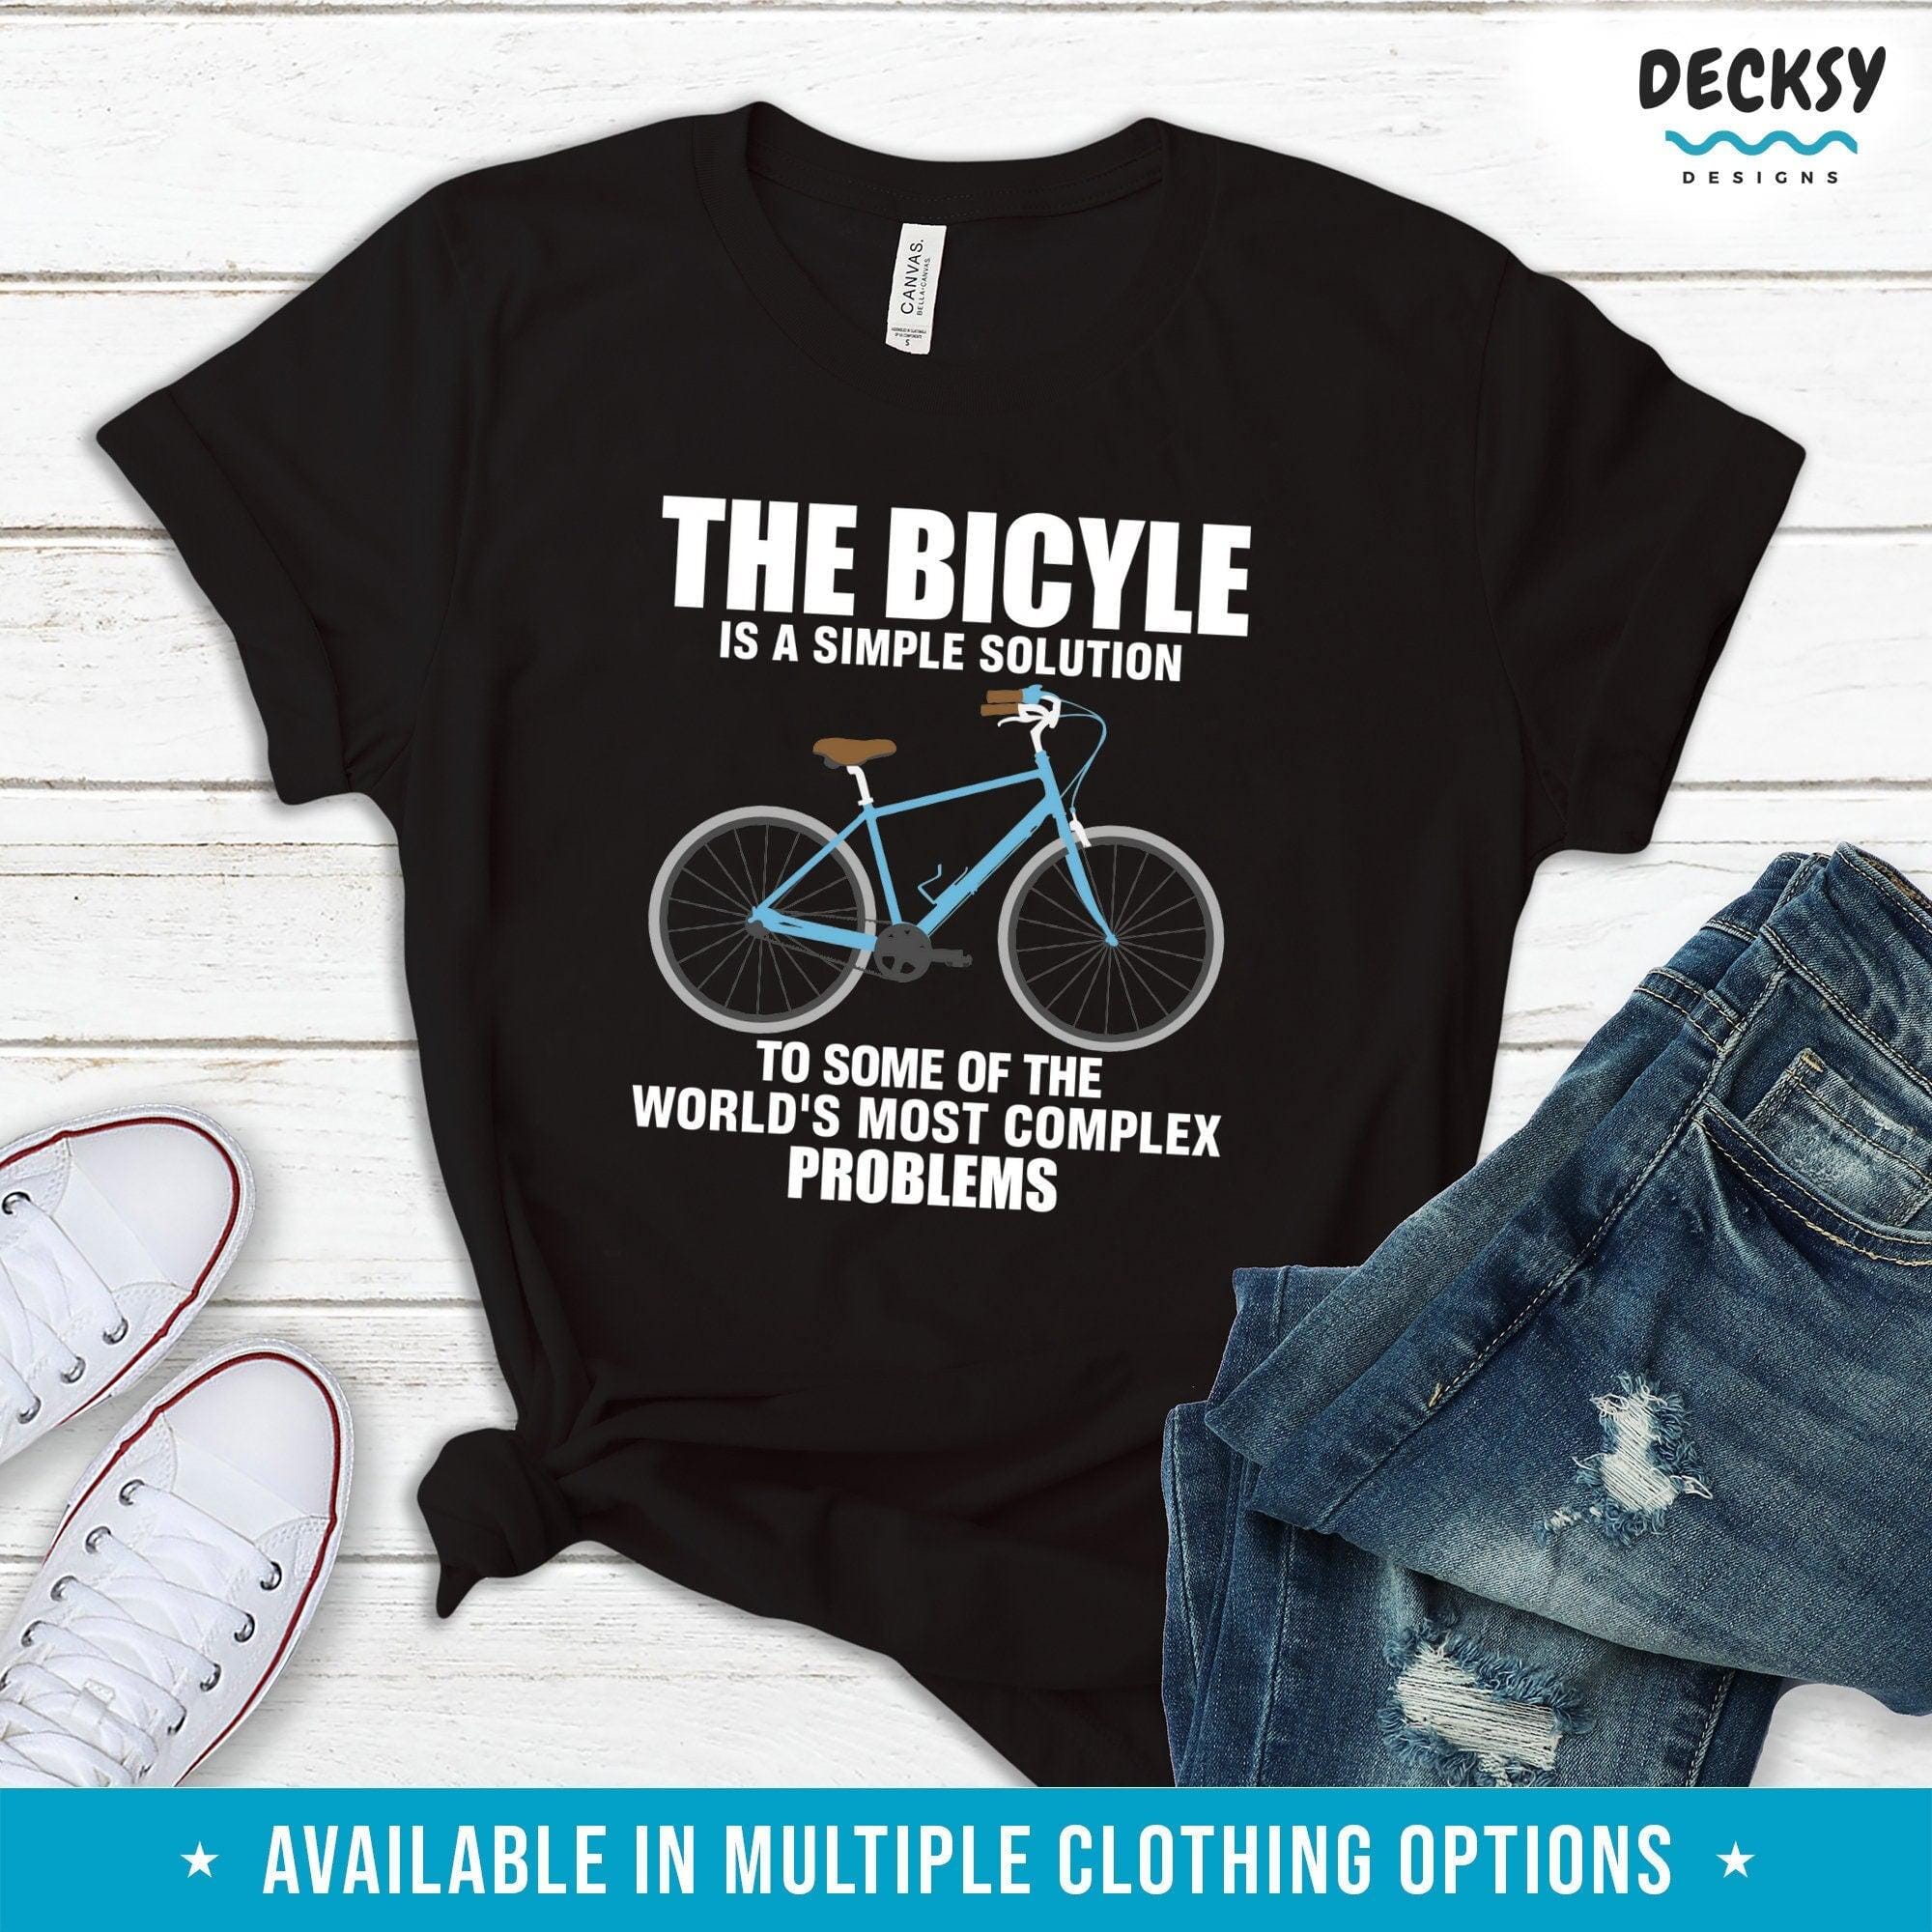 Bicycle Shirt, Cyclist Gift-Clothing:Gender-Neutral Adult Clothing:Tops & Tees:T-shirts:Graphic Tees-DecksyDesigns